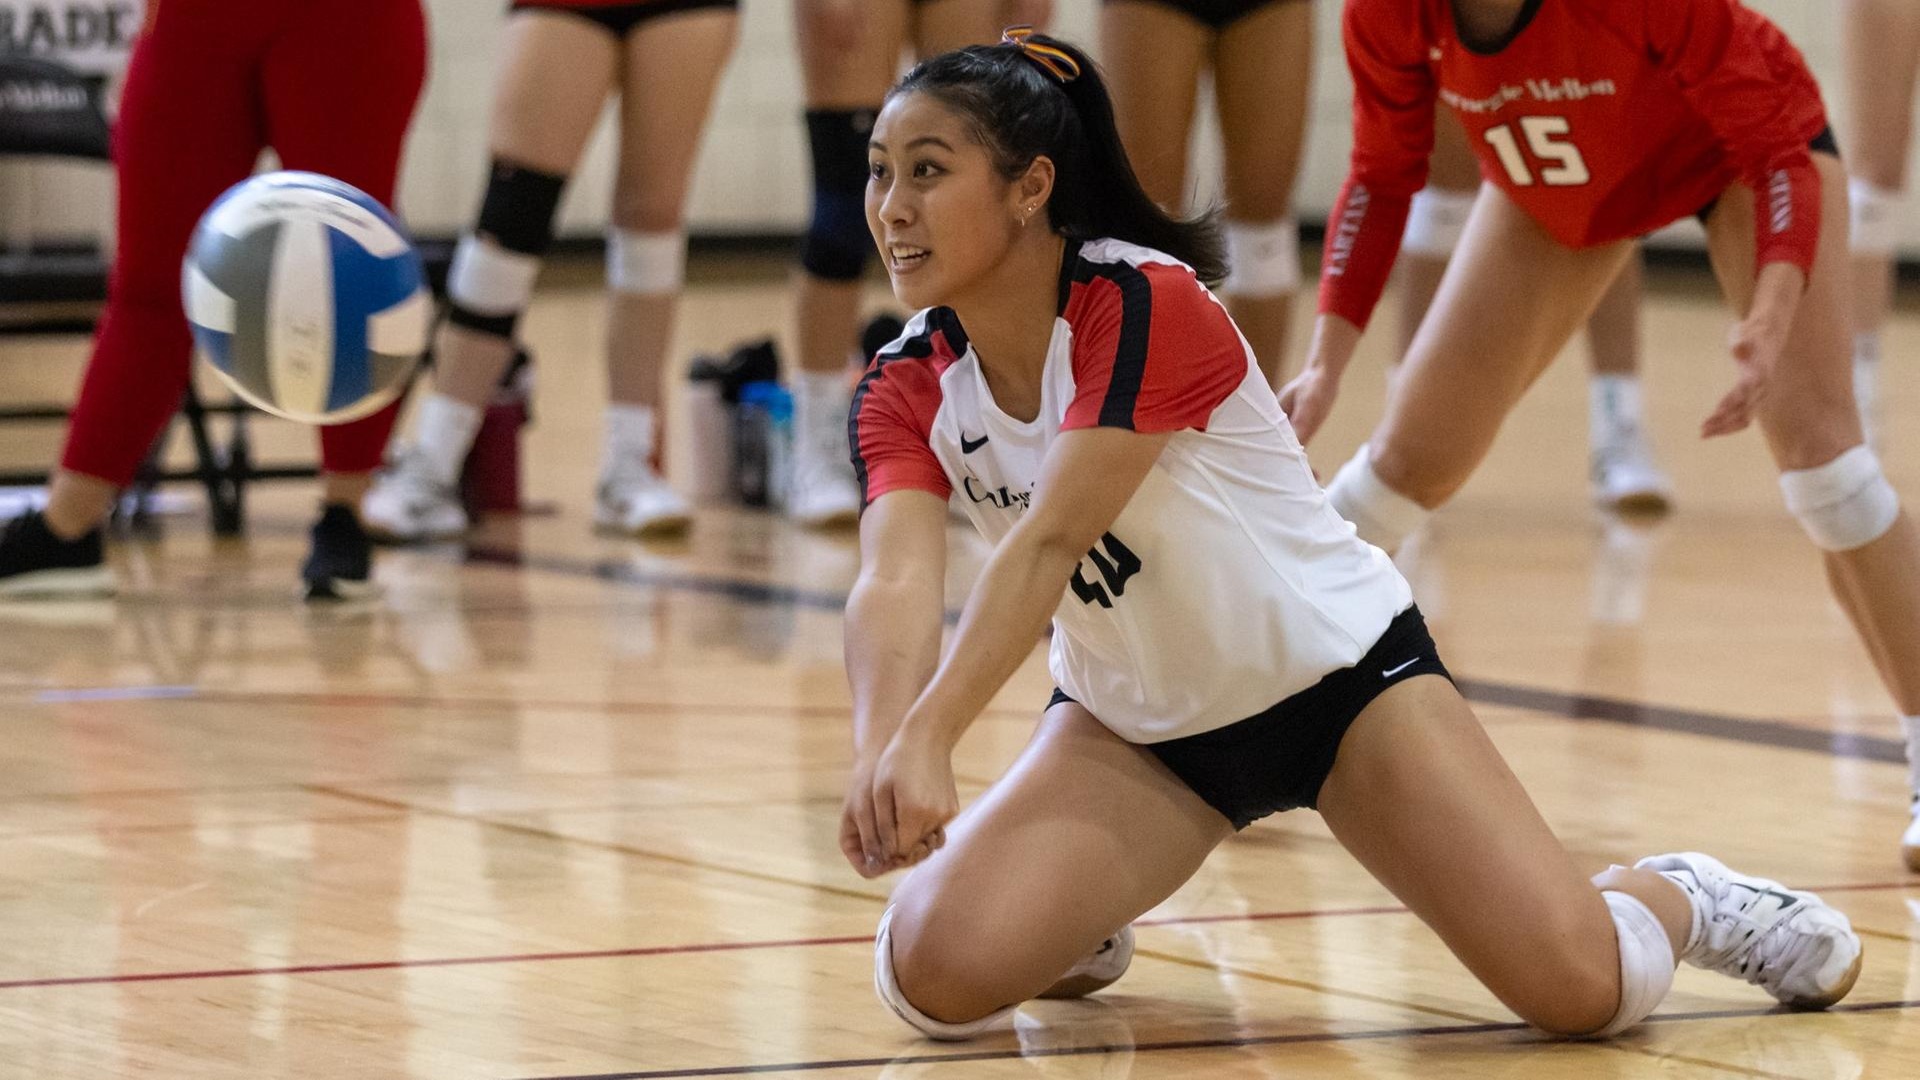 women's volleyball player wearing a white jersey kneels on ground to prepare to play a ball